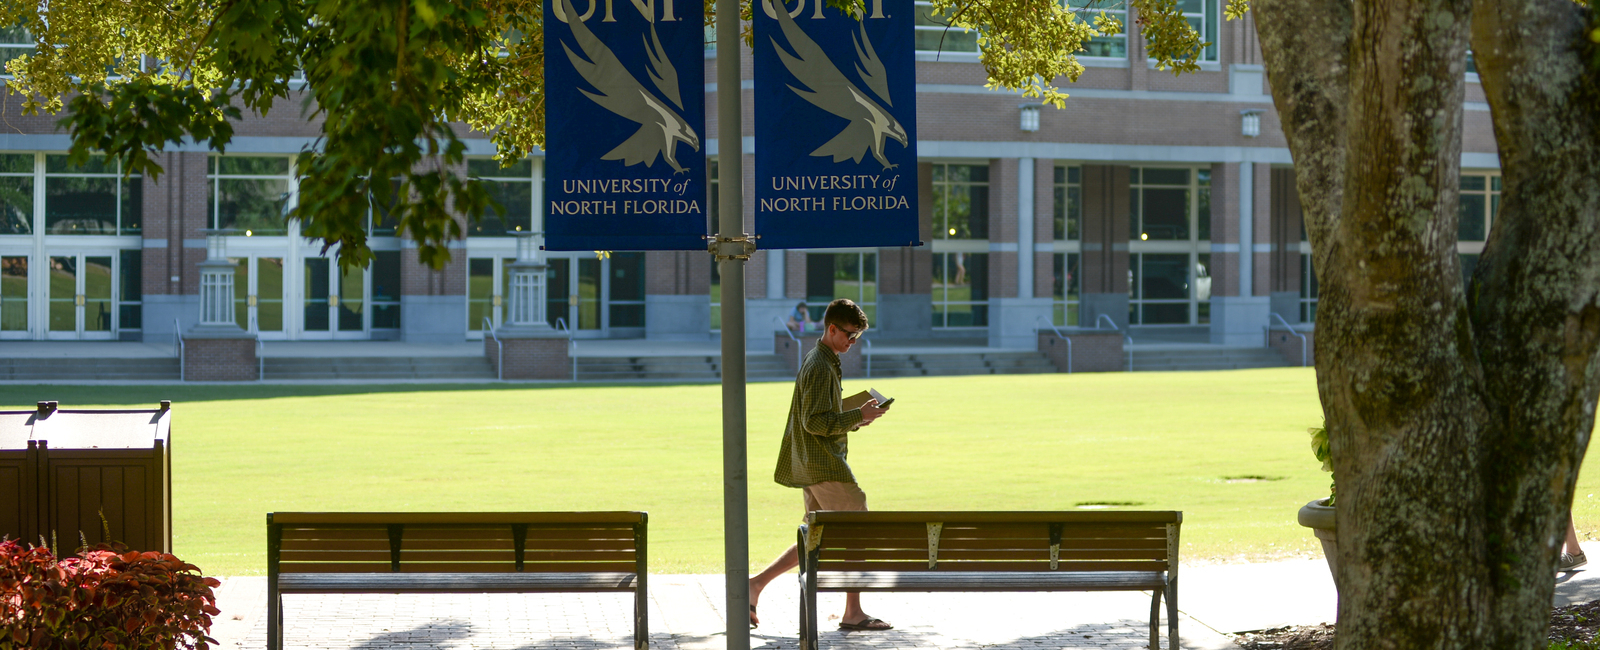 Student walking through UNF's campus by the green lawn with UNF signs on a lightpole